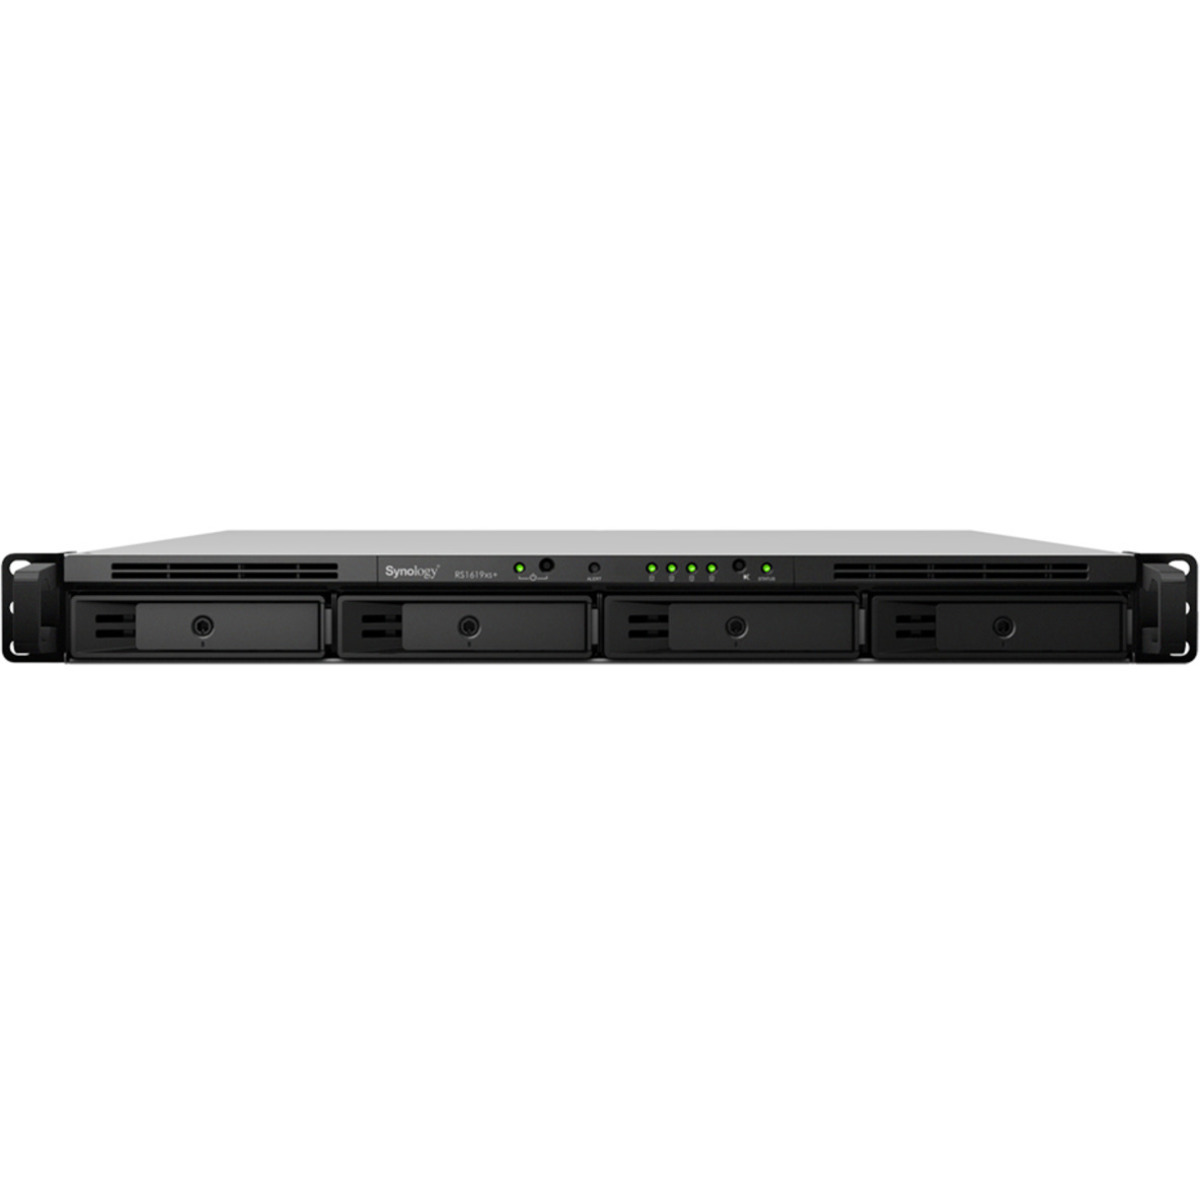 Synology RackStation RS1619xs+ 3tb 4-Bay RackMount Multimedia / Power User / Business NAS - Network Attached Storage Device 3x1tb Samsung 870 EVO MZ-77E1T0BAM 2.5 560/530MB/s SATA 6Gb/s SSD CONSUMER Class Drives Installed - Burn-In Tested RackStation RS1619xs+